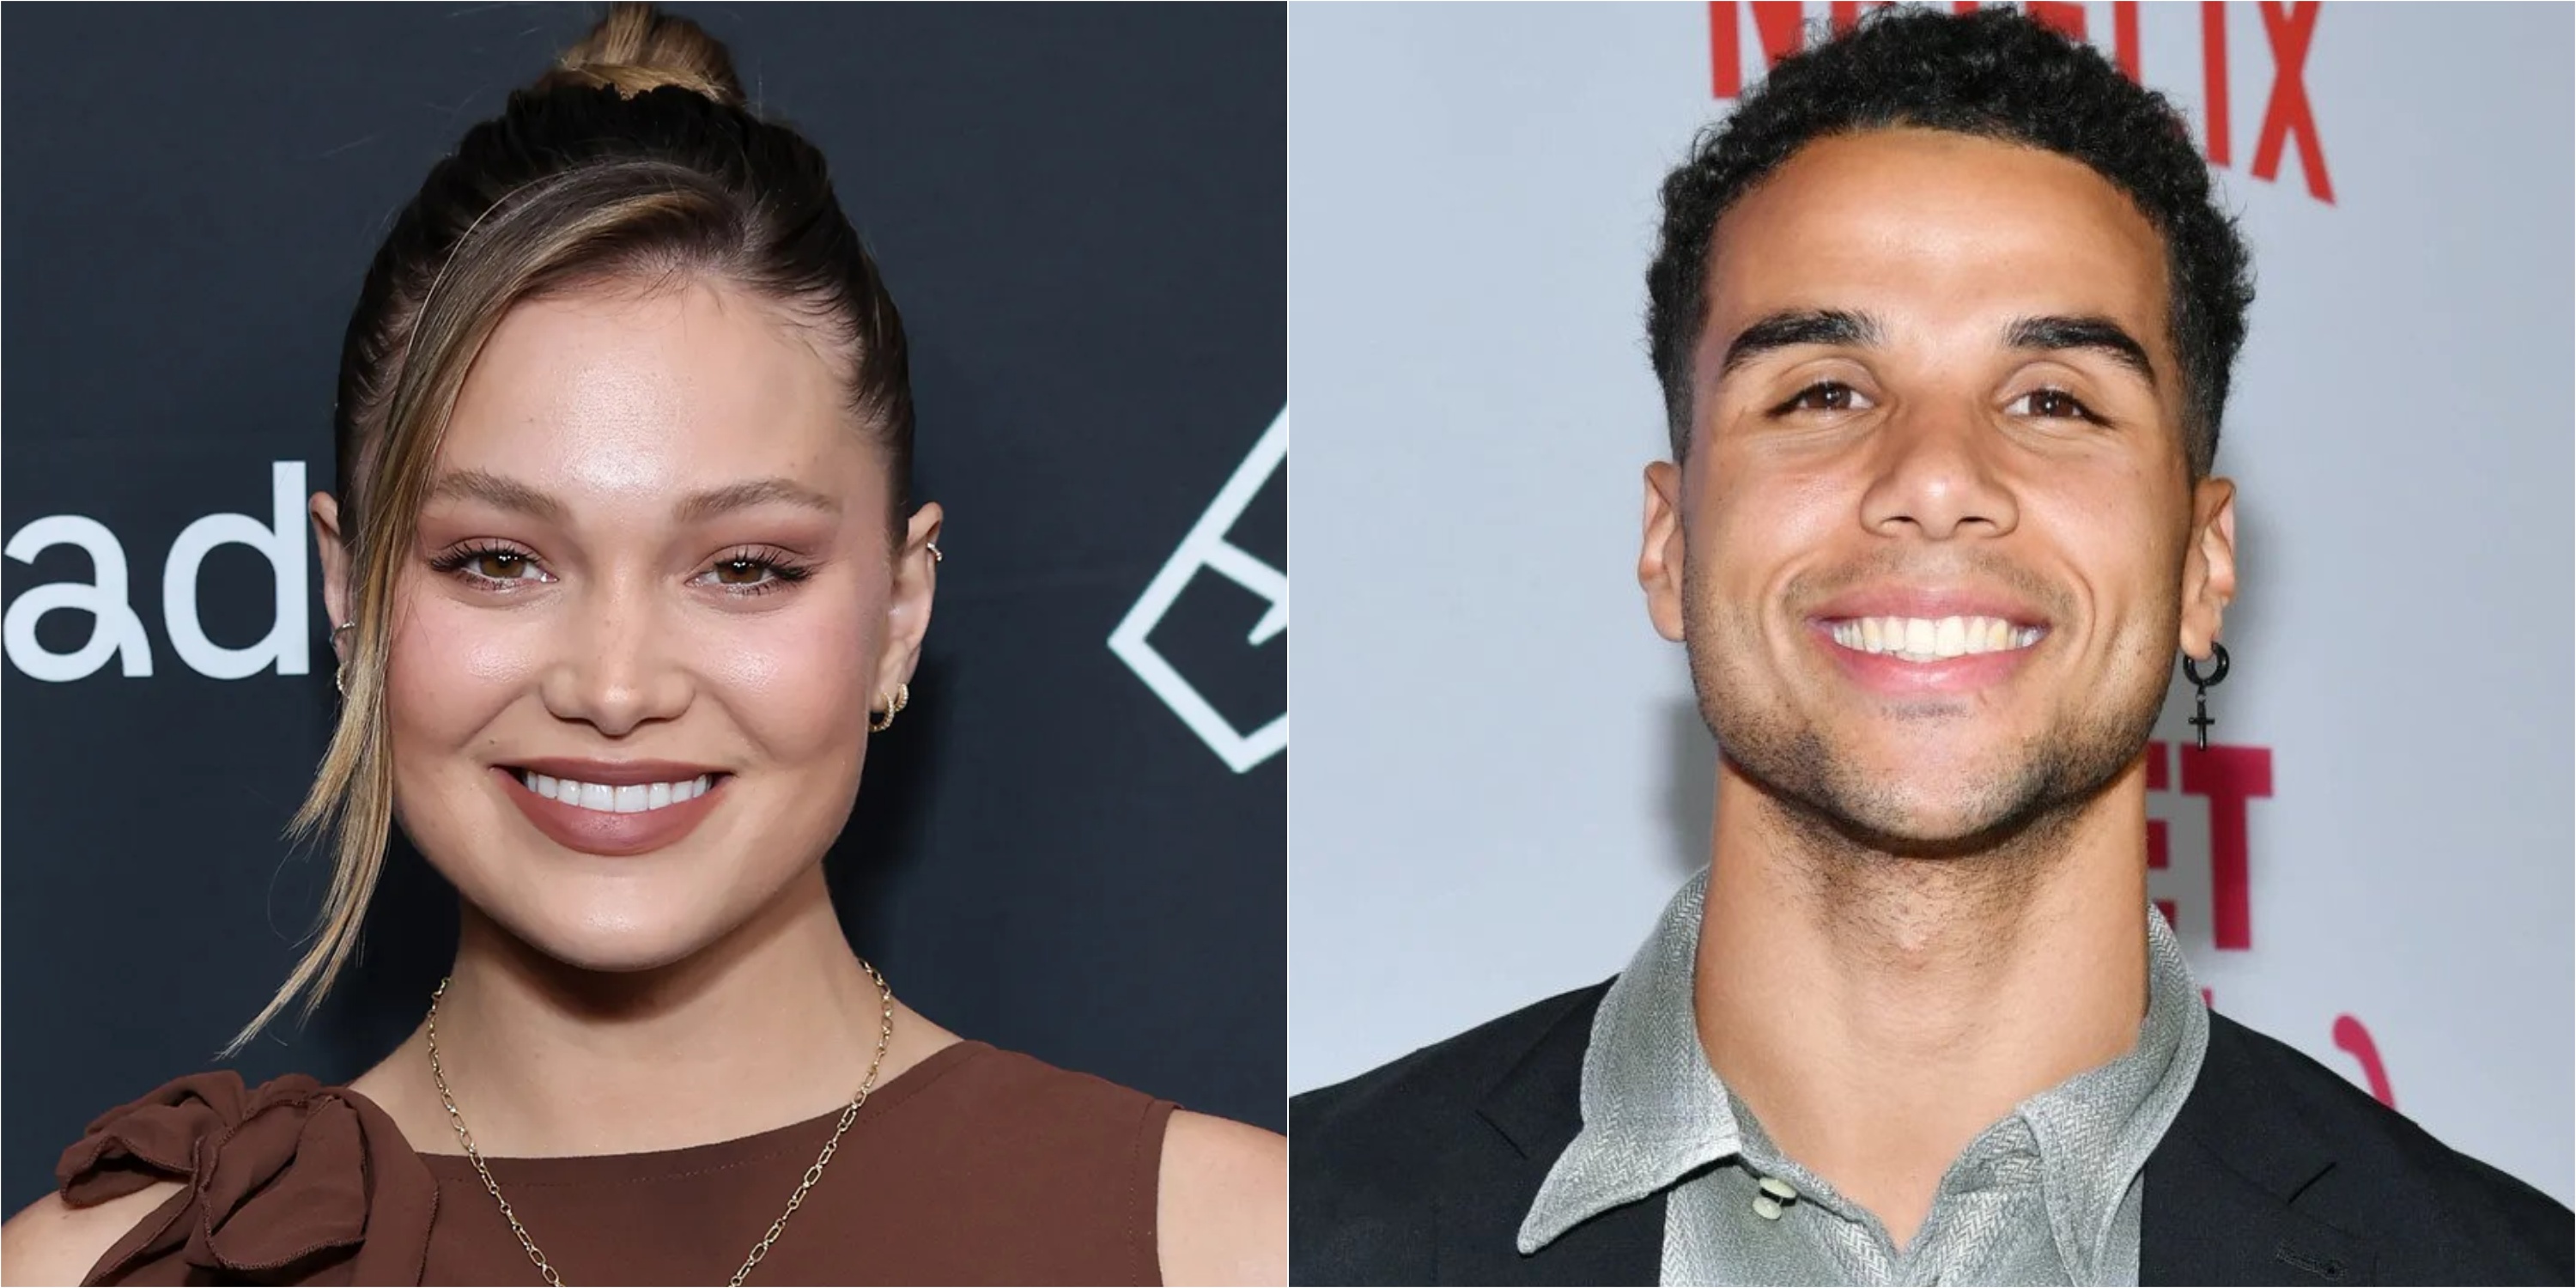 Deadline is exclusively reporting that Olivia Holt and Mason Gooding have signed up to star in the horror romantic-comedy Heart Eyes from Spyglass, with production currently underway in New Zealand.